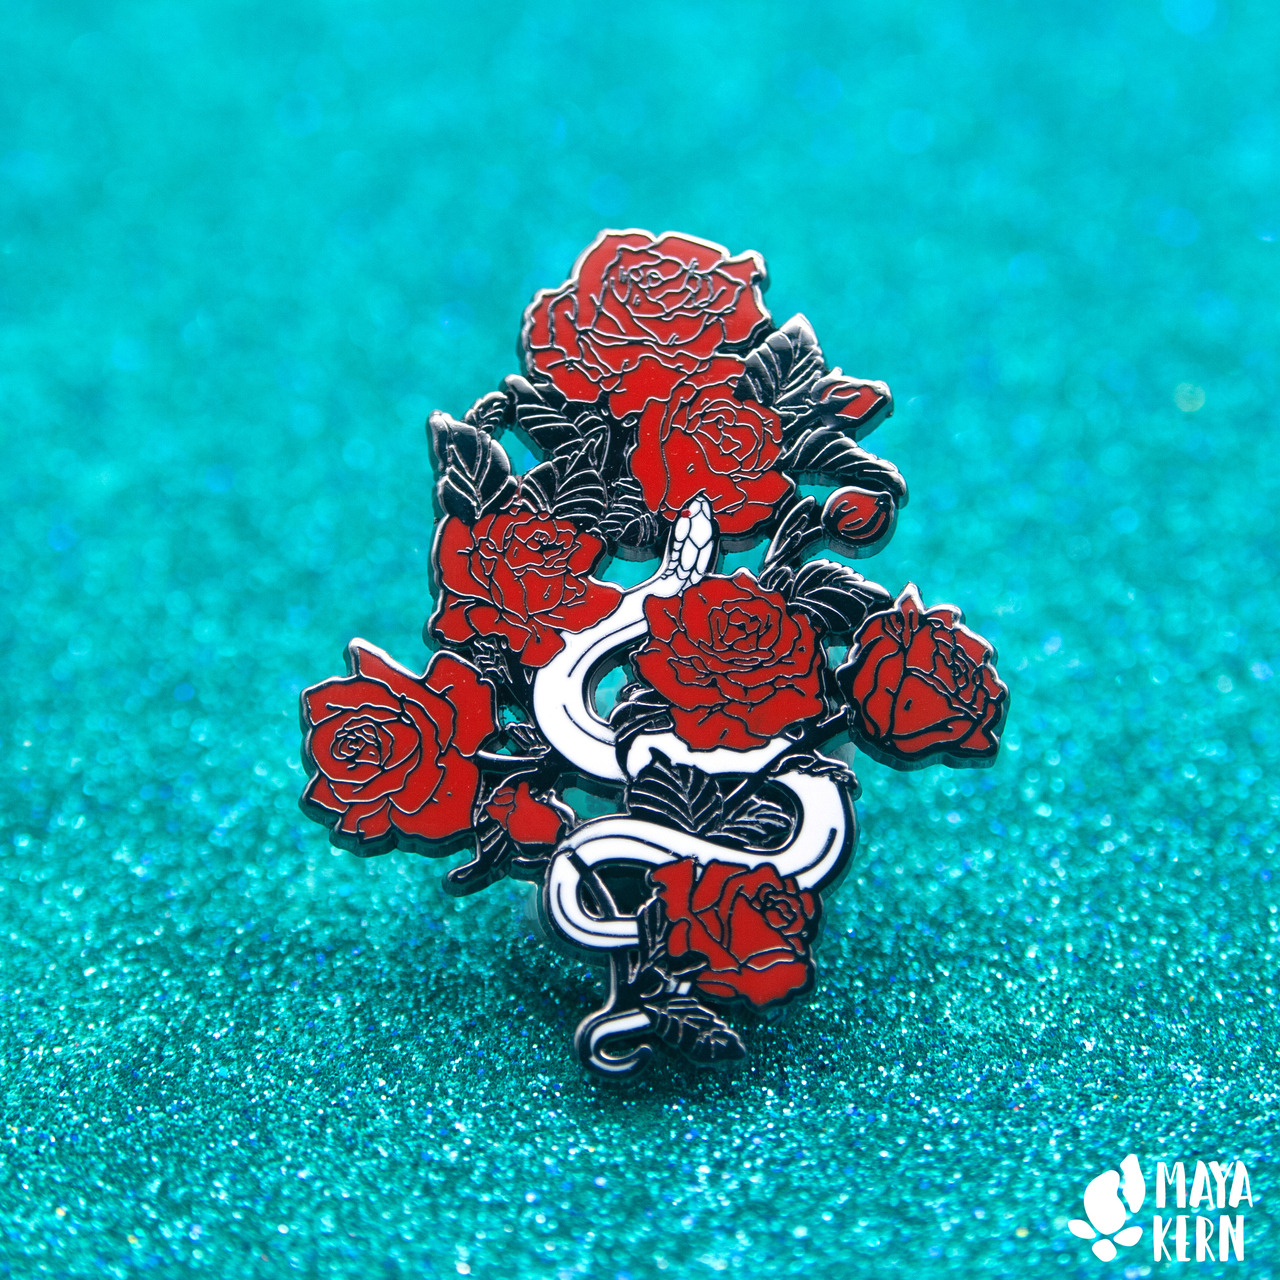 mayakern:mayakern:  the other color variants of my Hiss From a Rose enamel pin have